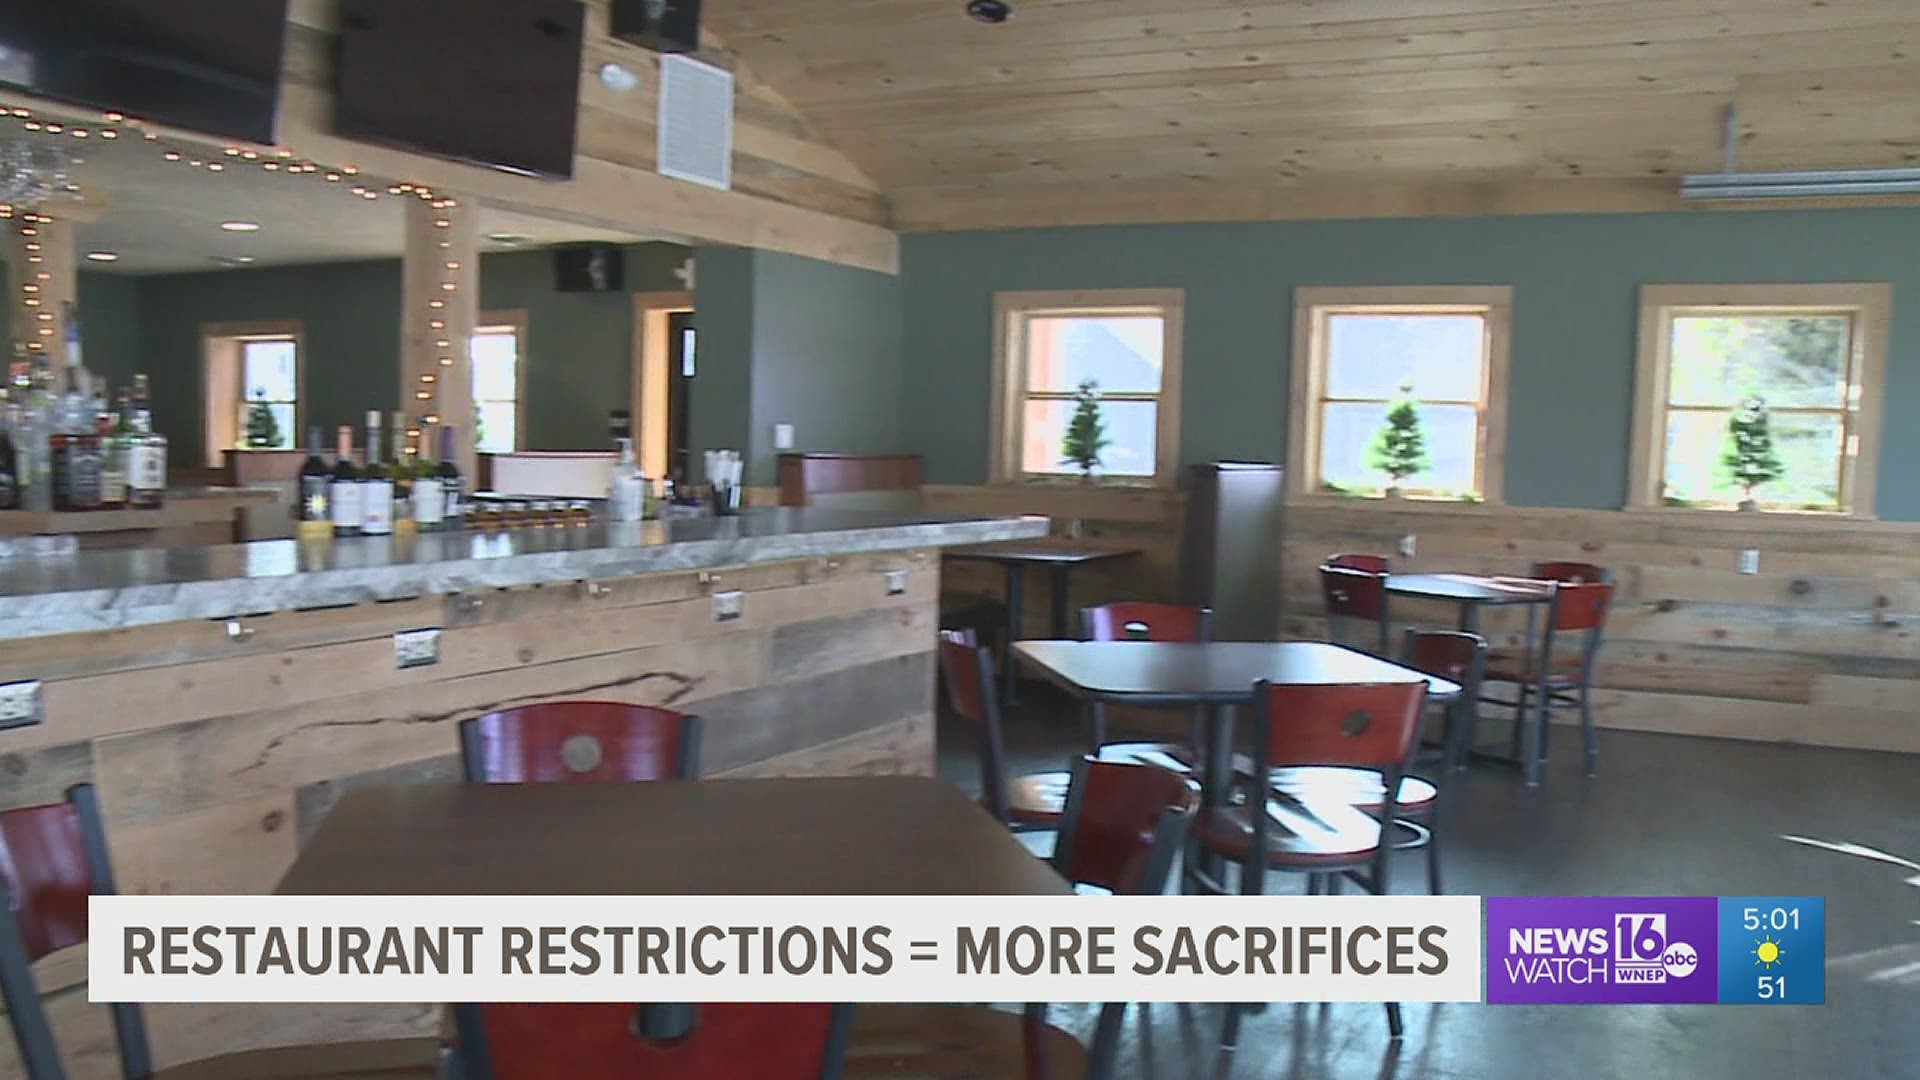 Restaurants are a major target of the governor's latest COVID-19 restrictions. Indoor dining will be shut down starting tomorrow until January 4.